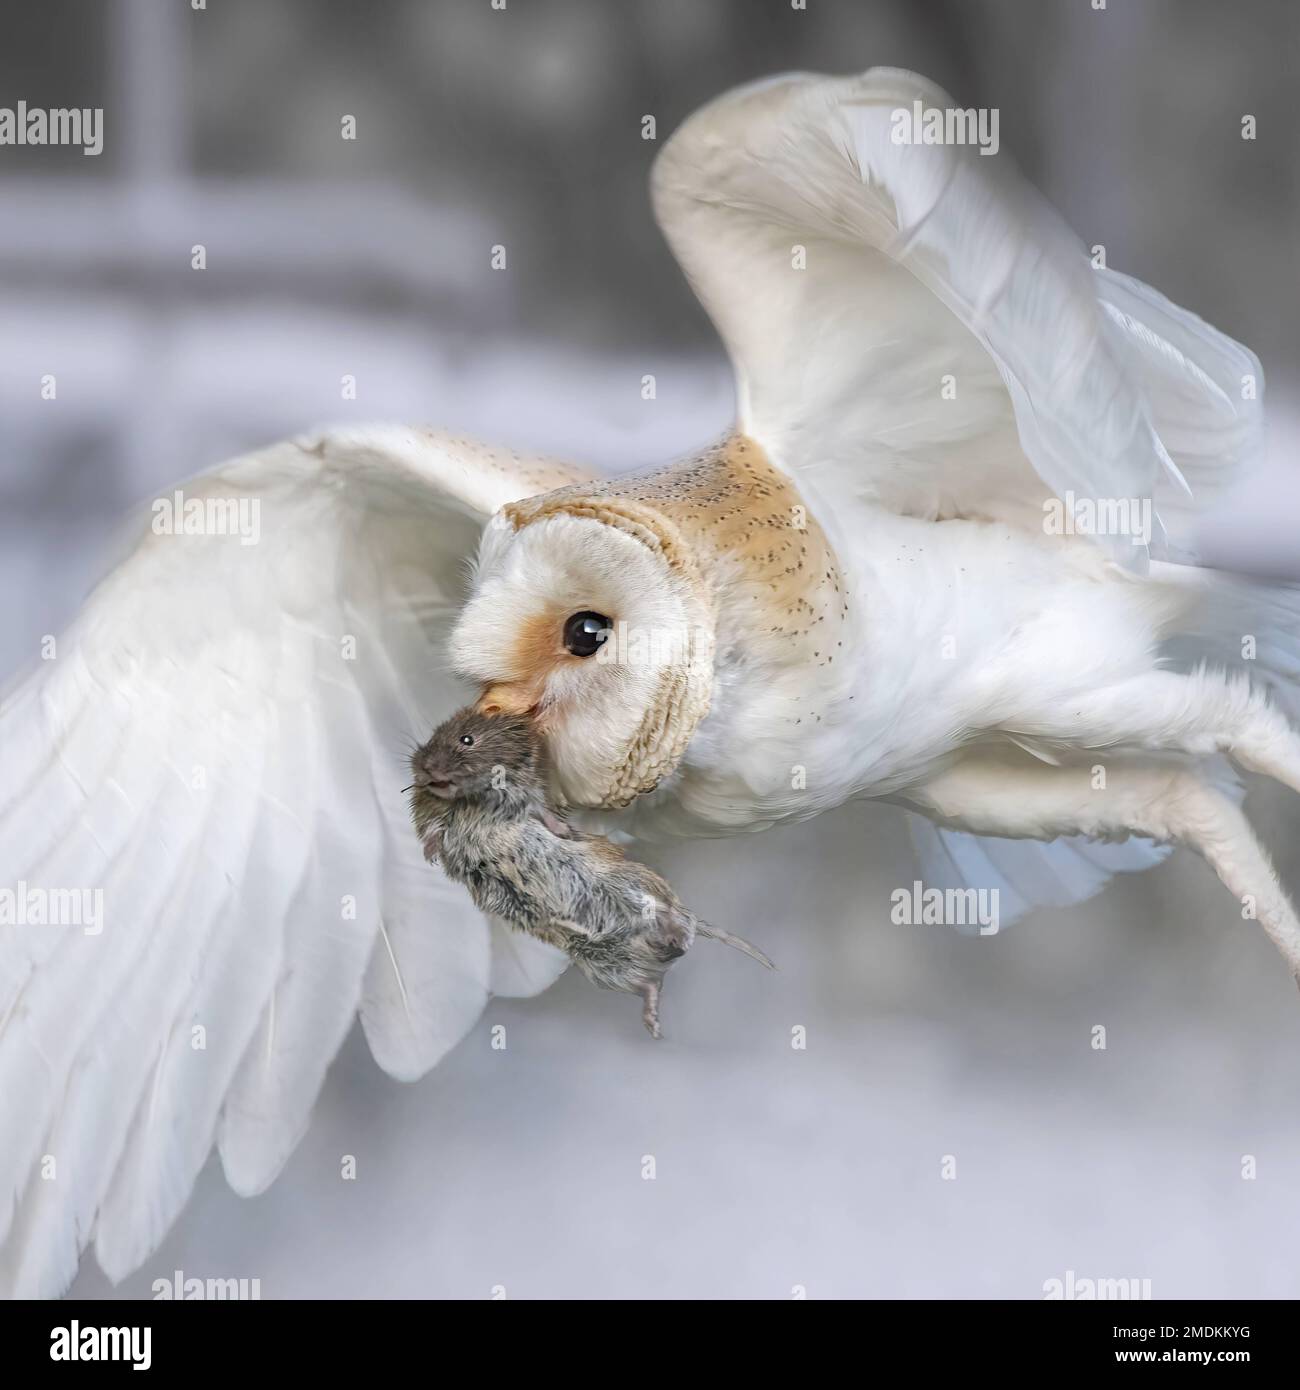 A mouse catch. Yorkshire, UK: THESE STUNNING images taken on last Friday 20th January show a Yorkshire barn owl darting in and out of the falling snow Stock Photo